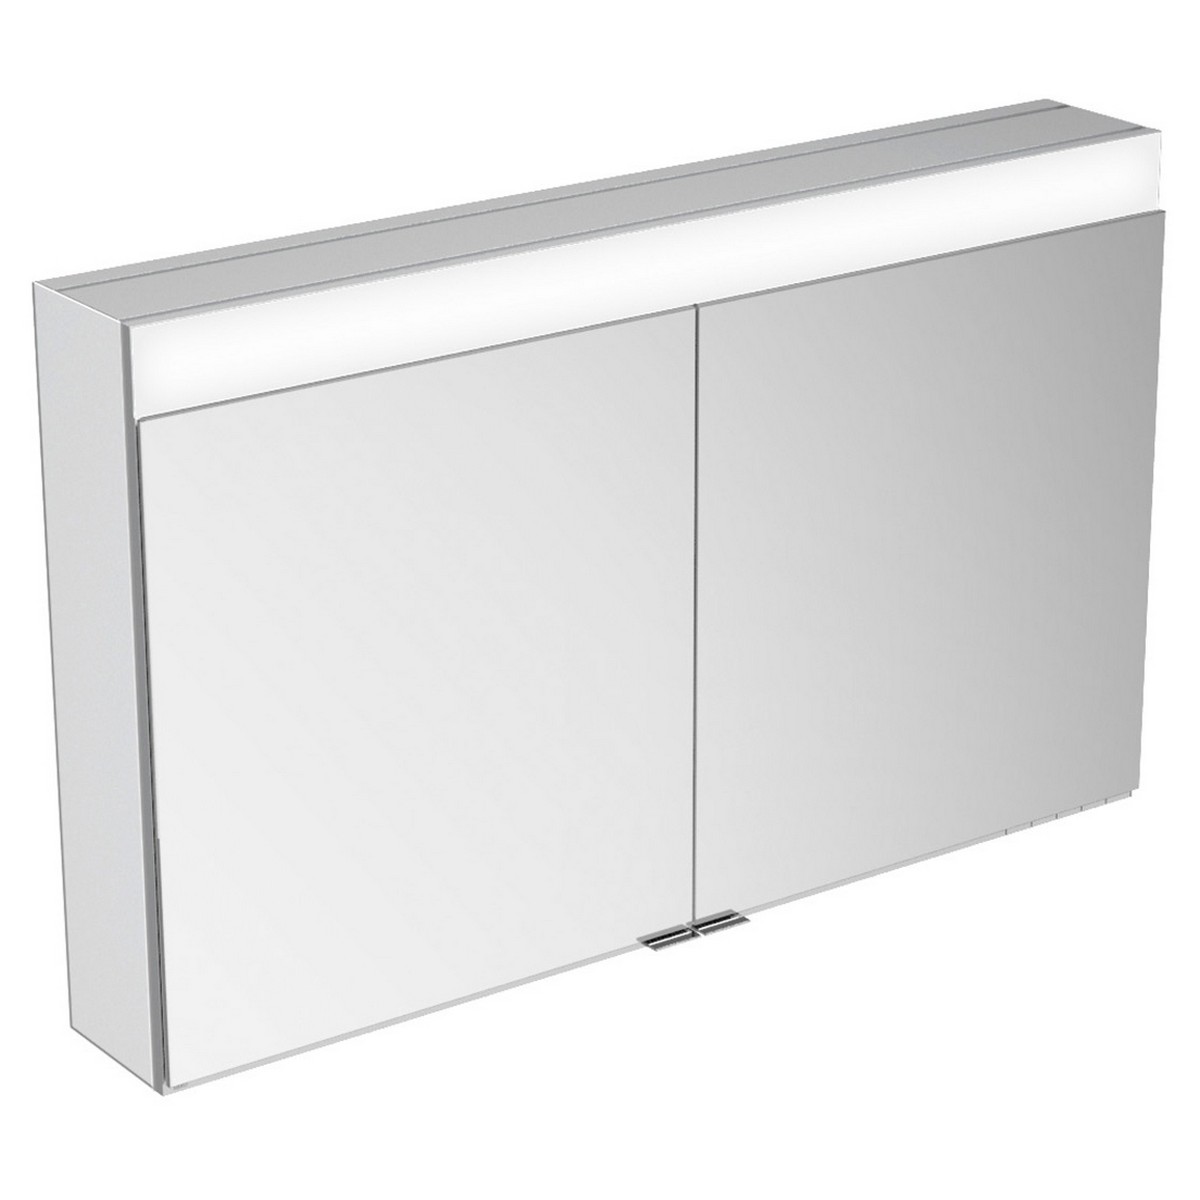 KEUCO 21522171351 EDITION 400 41 3/4 W X 6 1/2 D X 25 5/8 H INCH 2-DOOR 2700-6500K LED WALL MOUNTED MIRROR MEDICINE CABINET IN ALUMINUM